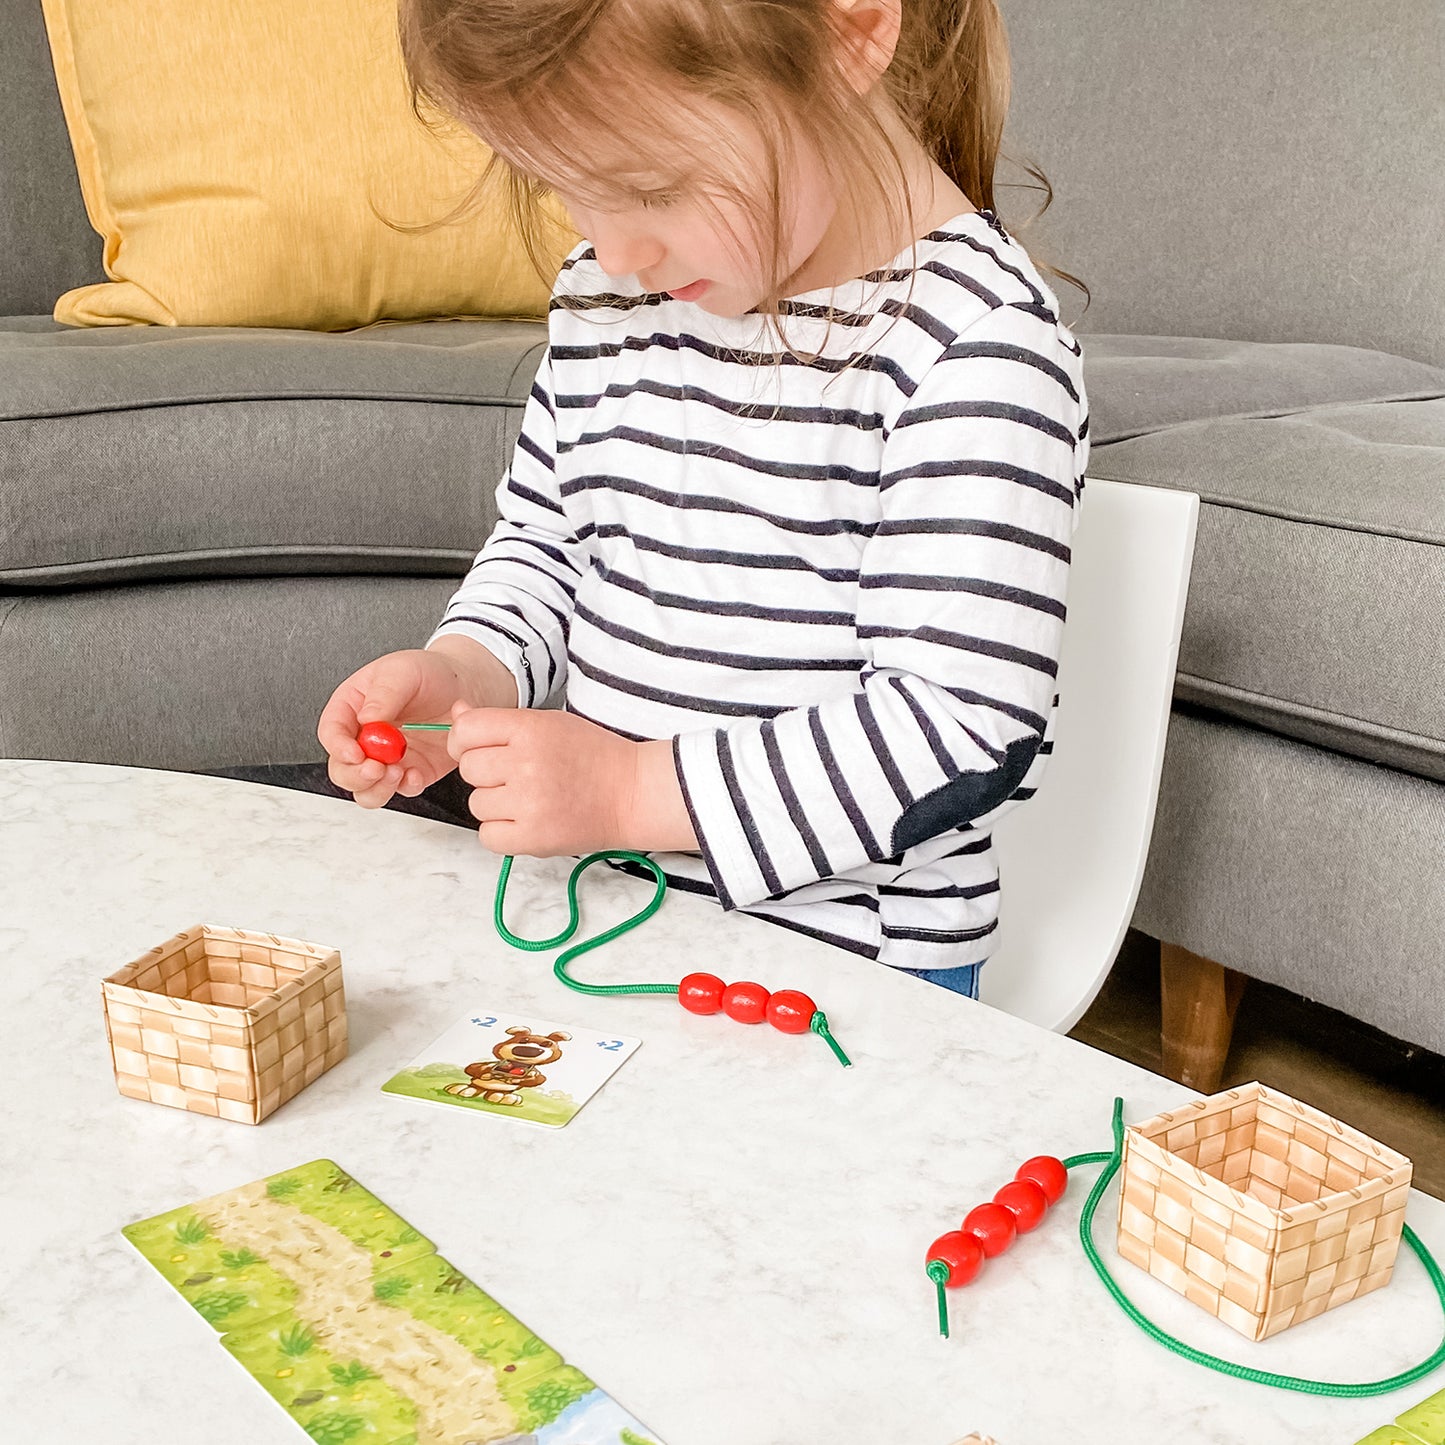 Share a Berry by SimplyFun is an early counting game and fine motor skills game for ages 3 and up.